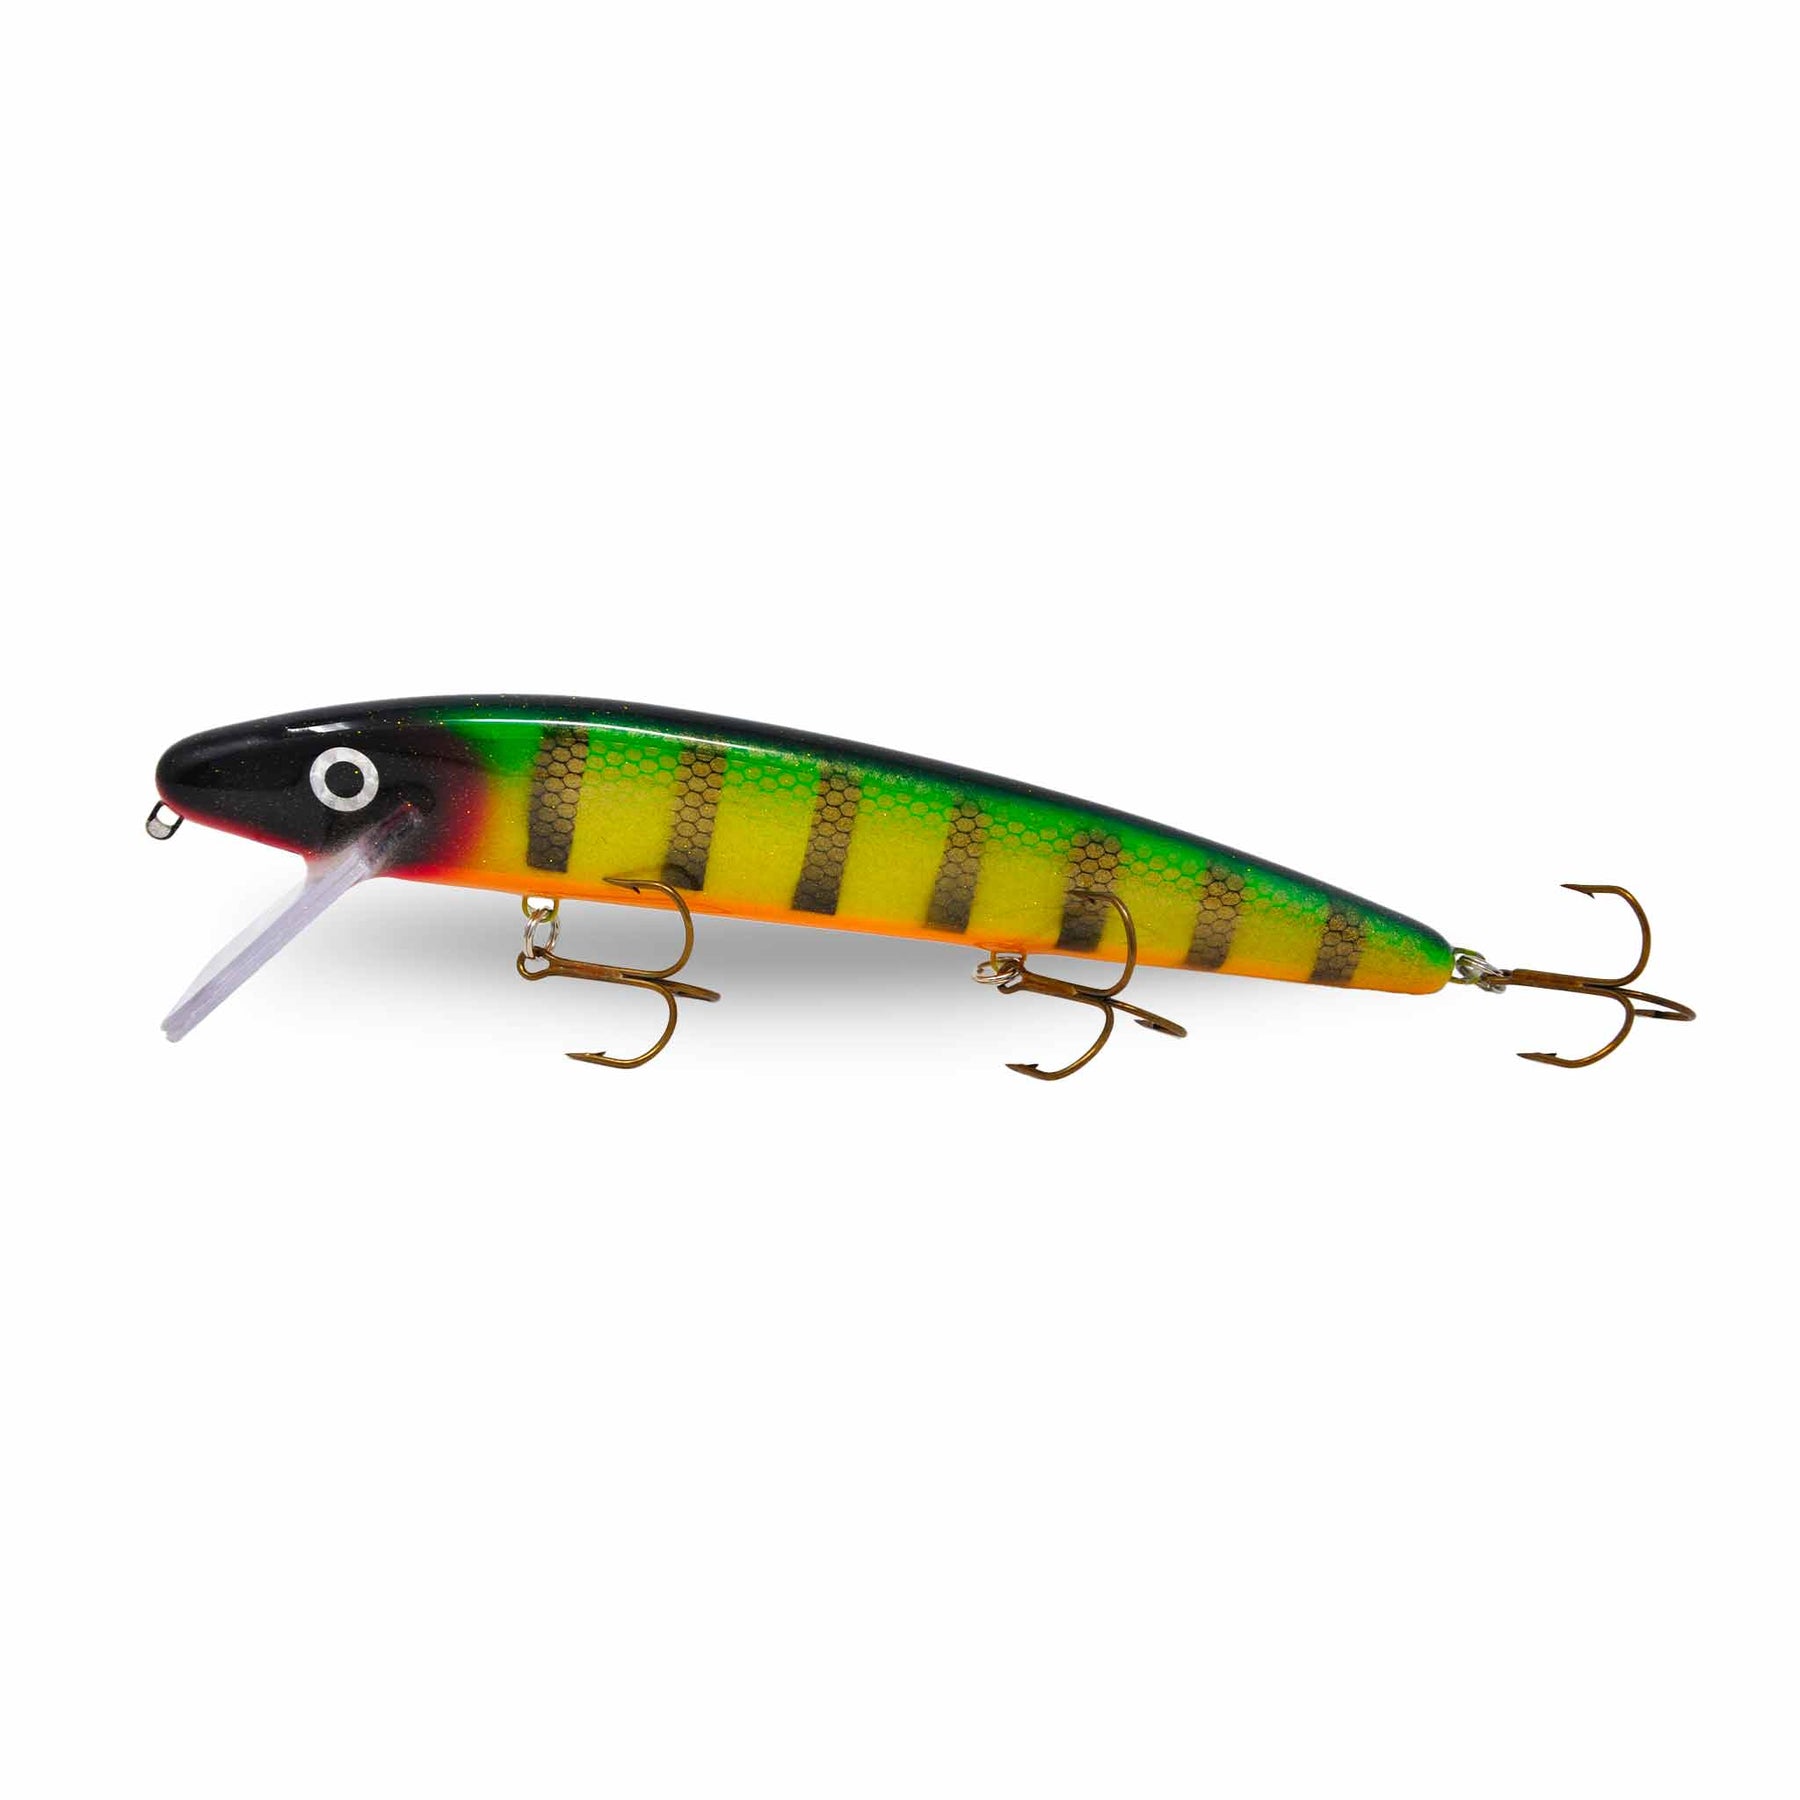 View of Crankbaits Slammer 10" Minnow Crankbait Perch available at EZOKO Pike and Musky Shop